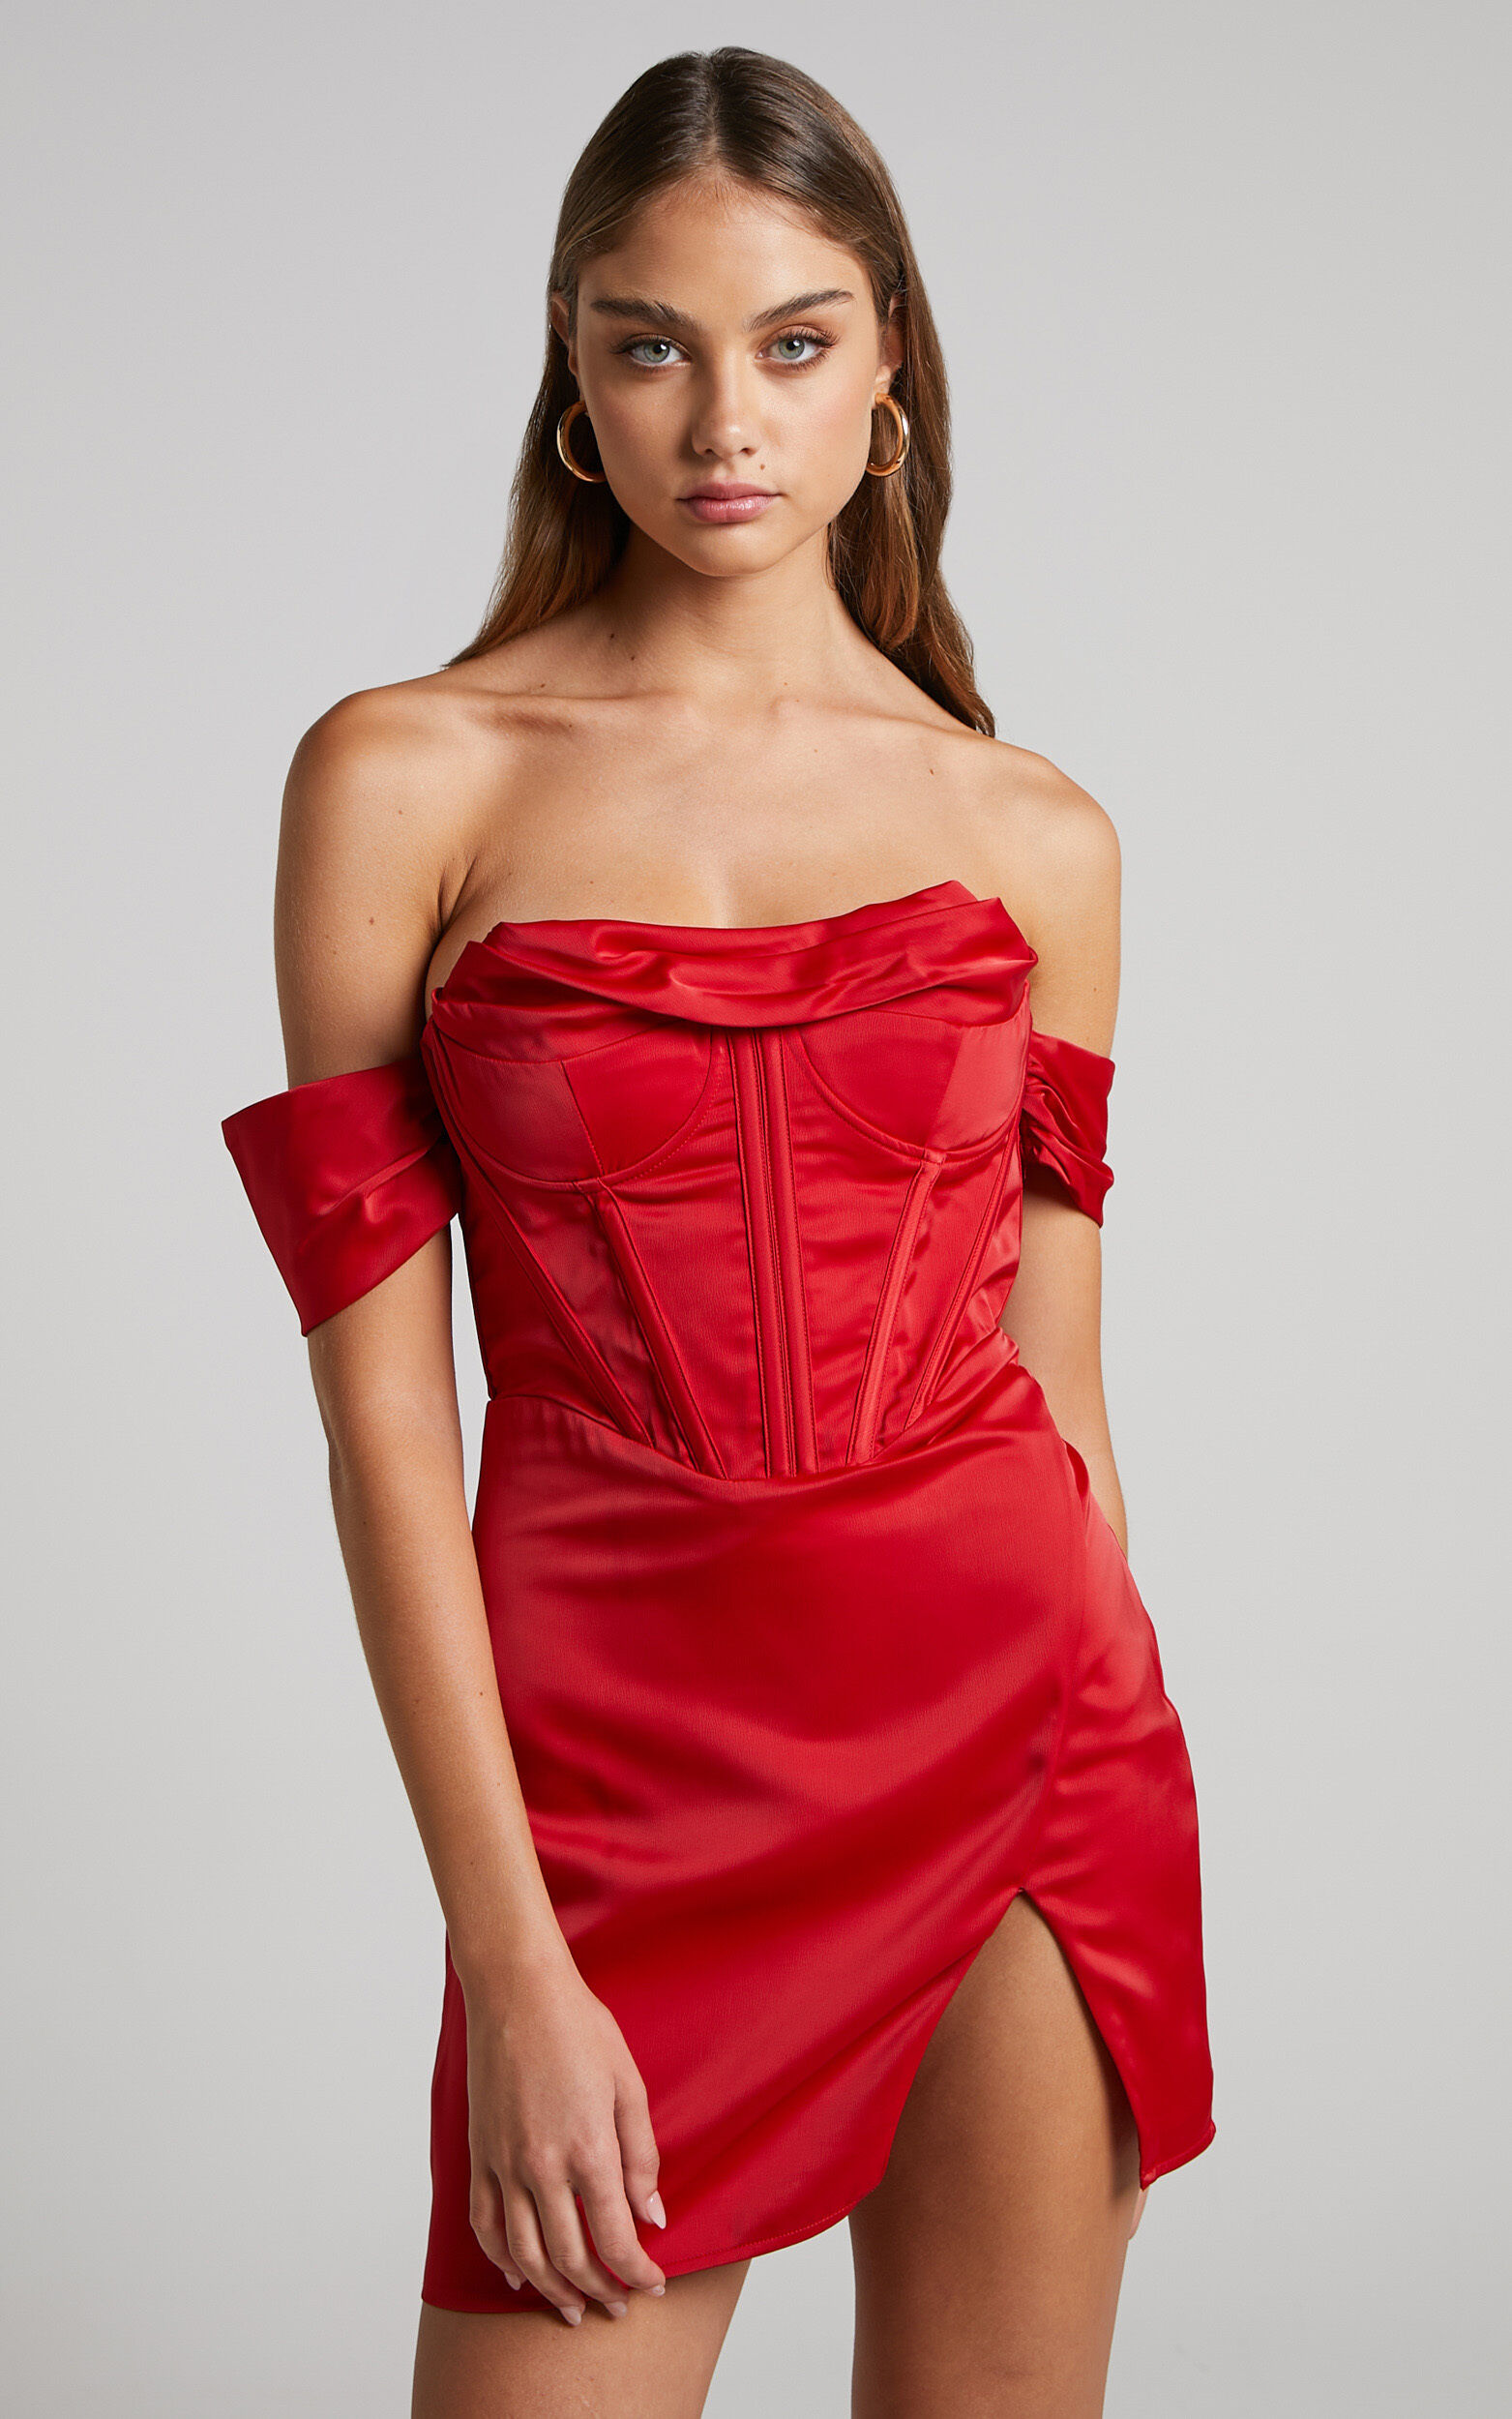 https://images.showpo.com/dw/image/v2/BDPQ_PRD/on/demandware.static/-/Sites-sp-master-catalog/default/dw03658c9b/images/wallace-draped-cowl-neck-mini-dress-with-corset-bodice-detail-SD22100016/Wallace_Draped_Cowl_Neck_Mini_Dress_with_Corset_Bodice_Detail_in_Red_2528SD22100016022529_3.jpg?sw=1563&sh=2500